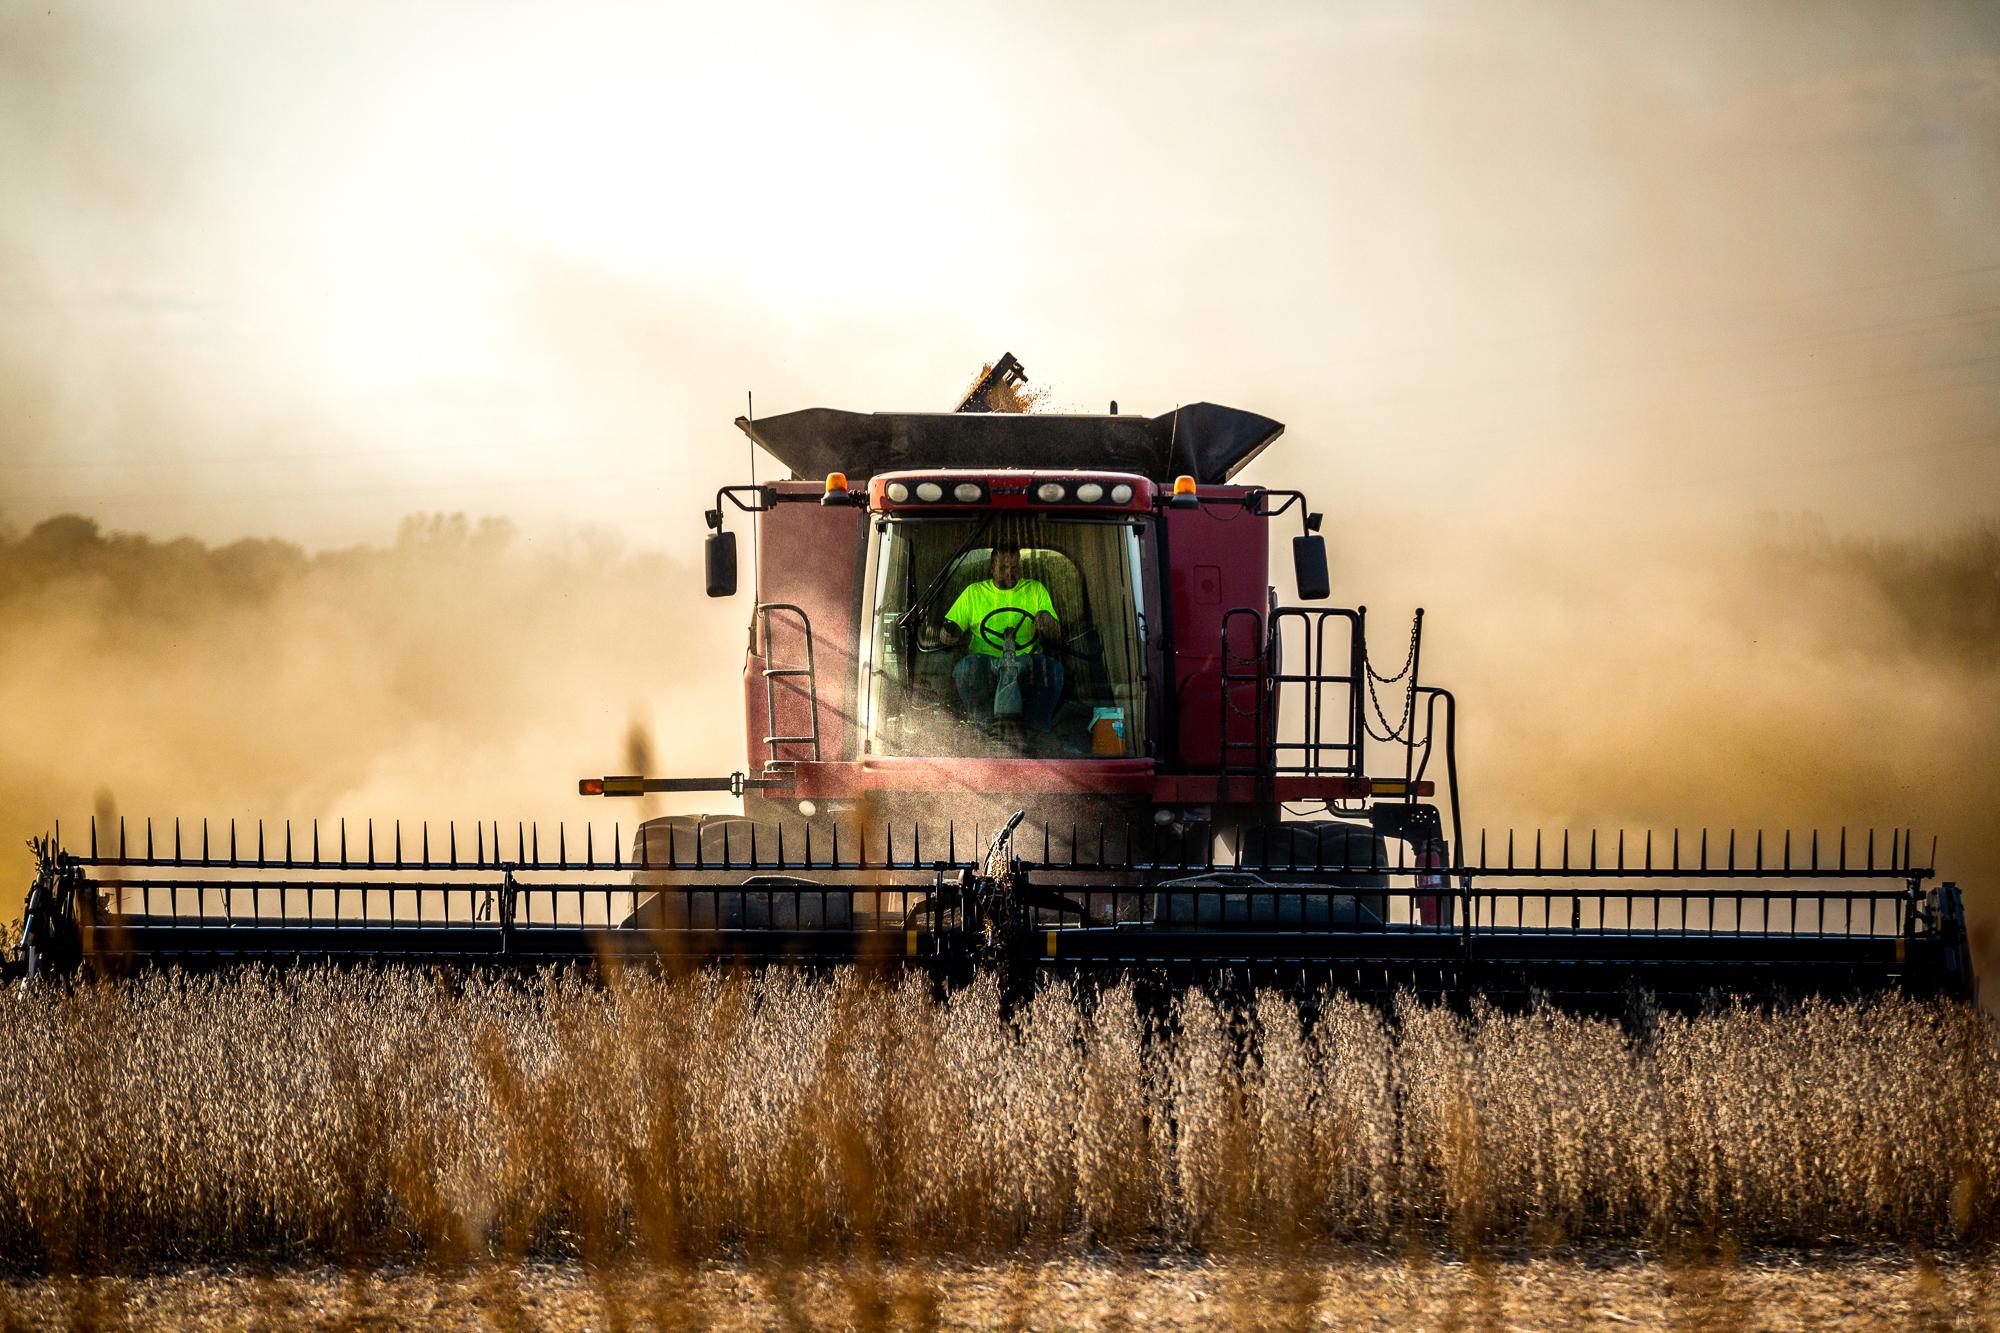 A combine harvests the last row of soybeans on Tuesday, November 9, 2021 in a field near Interstate 63. As fall wears on soybean harvesting season...